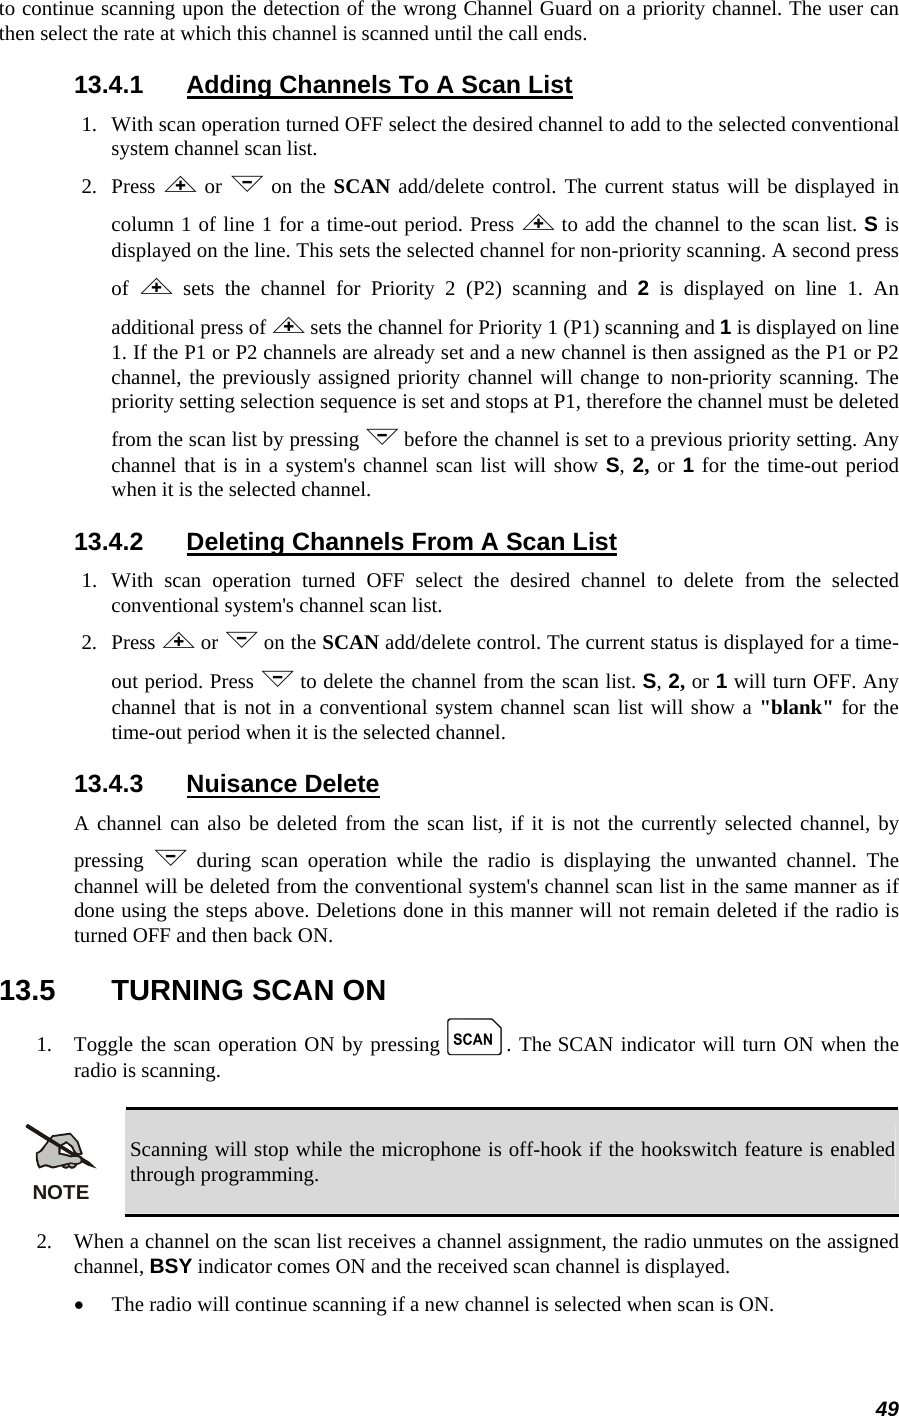 49 to continue scanning upon the detection of the wrong Channel Guard on a priority channel. The user can then select the rate at which this channel is scanned until the call ends. 13.4.1  Adding Channels To A Scan List 1.   With scan operation turned OFF select the desired channel to add to the selected conventional system channel scan list. 2.   Press  &lt; or &gt; on the SCAN add/delete control. The current status will be displayed in column 1 of line 1 for a time-out period. Press &lt; to add the channel to the scan list. S is displayed on the line. This sets the selected channel for non-priority scanning. A second press of  &lt; sets the channel for Priority 2 (P2) scanning and 2 is displayed on line 1. An additional press of &lt; sets the channel for Priority 1 (P1) scanning and 1 is displayed on line 1. If the P1 or P2 channels are already set and a new channel is then assigned as the P1 or P2 channel, the previously assigned priority channel will change to non-priority scanning. The priority setting selection sequence is set and stops at P1, therefore the channel must be deleted from the scan list by pressing &gt; before the channel is set to a previous priority setting. Any channel that is in a system&apos;s channel scan list will show S, 2, or 1 for the time-out period when it is the selected channel. 13.4.2  Deleting Channels From A Scan List 1.  With scan operation turned OFF select the desired channel to delete from the selected conventional system&apos;s channel scan list. 2.   Press &lt; or &gt; on the SCAN add/delete control. The current status is displayed for a time-out period. Press &gt; to delete the channel from the scan list. S, 2, or 1 will turn OFF. Any channel that is not in a conventional system channel scan list will show a &quot;blank&quot; for the time-out period when it is the selected channel. 13.4.3 Nuisance Delete A channel can also be deleted from the scan list, if it is not the currently selected channel, by pressing  &gt; during scan operation while the radio is displaying the unwanted channel. The channel will be deleted from the conventional system&apos;s channel scan list in the same manner as if done using the steps above. Deletions done in this manner will not remain deleted if the radio is turned OFF and then back ON. 13.5  TURNING SCAN ON 1.   Toggle the scan operation ON by pressing k. The SCAN indicator will turn ON when the radio is scanning.  NOTE Scanning will stop while the microphone is off-hook if the hookswitch feature is enabled through programming. 2.   When a channel on the scan list receives a channel assignment, the radio unmutes on the assigned channel, BSY indicator comes ON and the received scan channel is displayed. • The radio will continue scanning if a new channel is selected when scan is ON. 